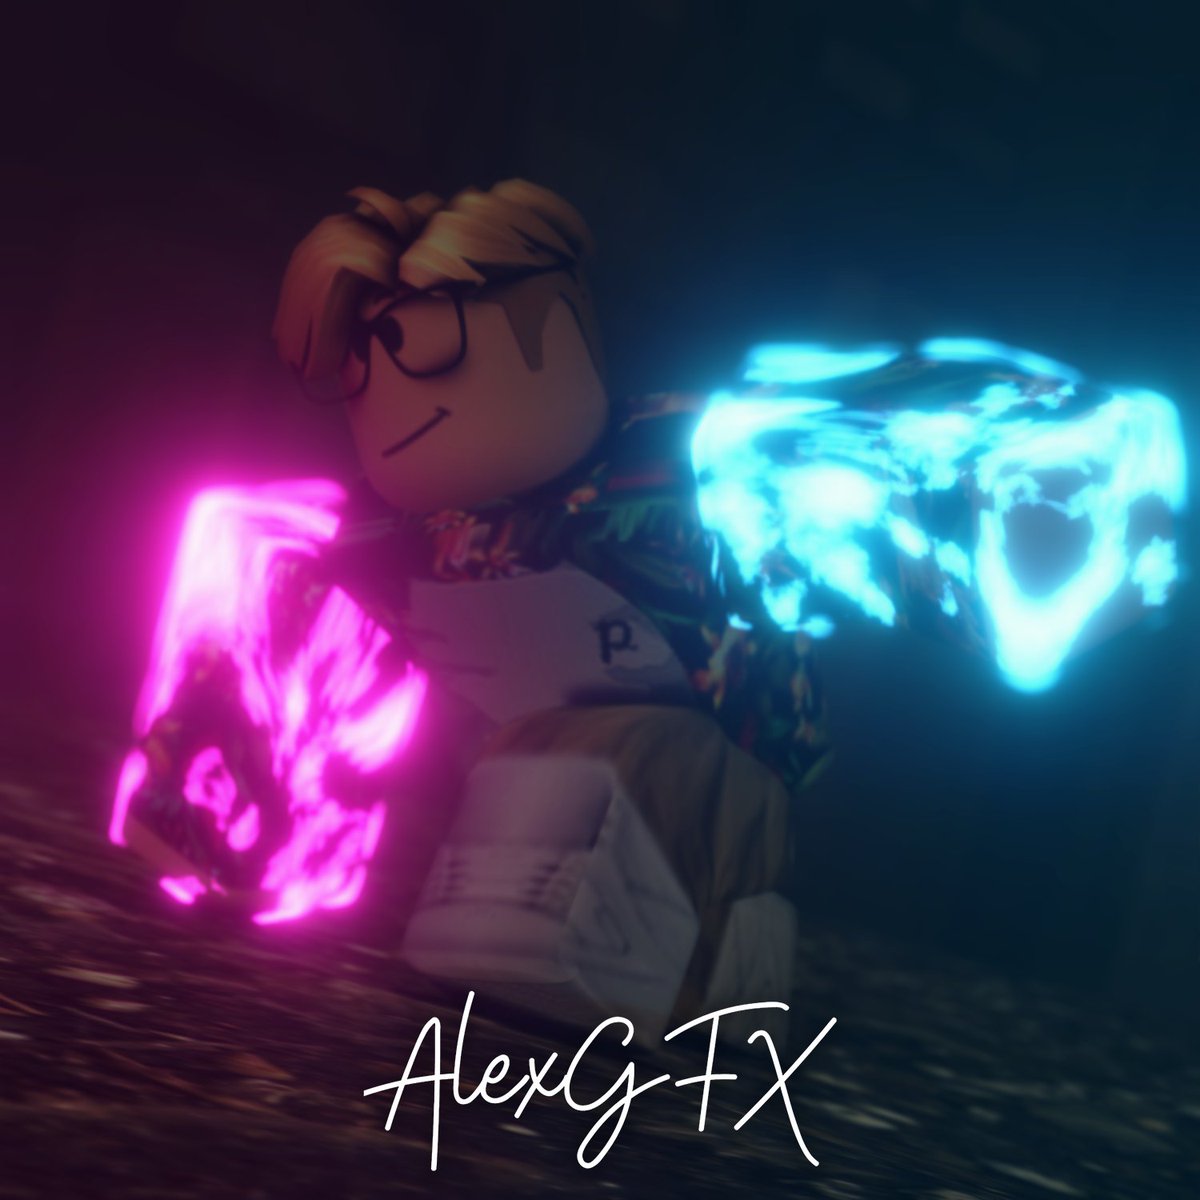 Alehander Tne Toaѕt On Twitter So Apparently This Fire Arms Gfx Are Kinda Popular Now Lemme Try To Make It So Which Render Engine Is Better Eevee 1st Or Cycles 2nd - roblox fire gfx